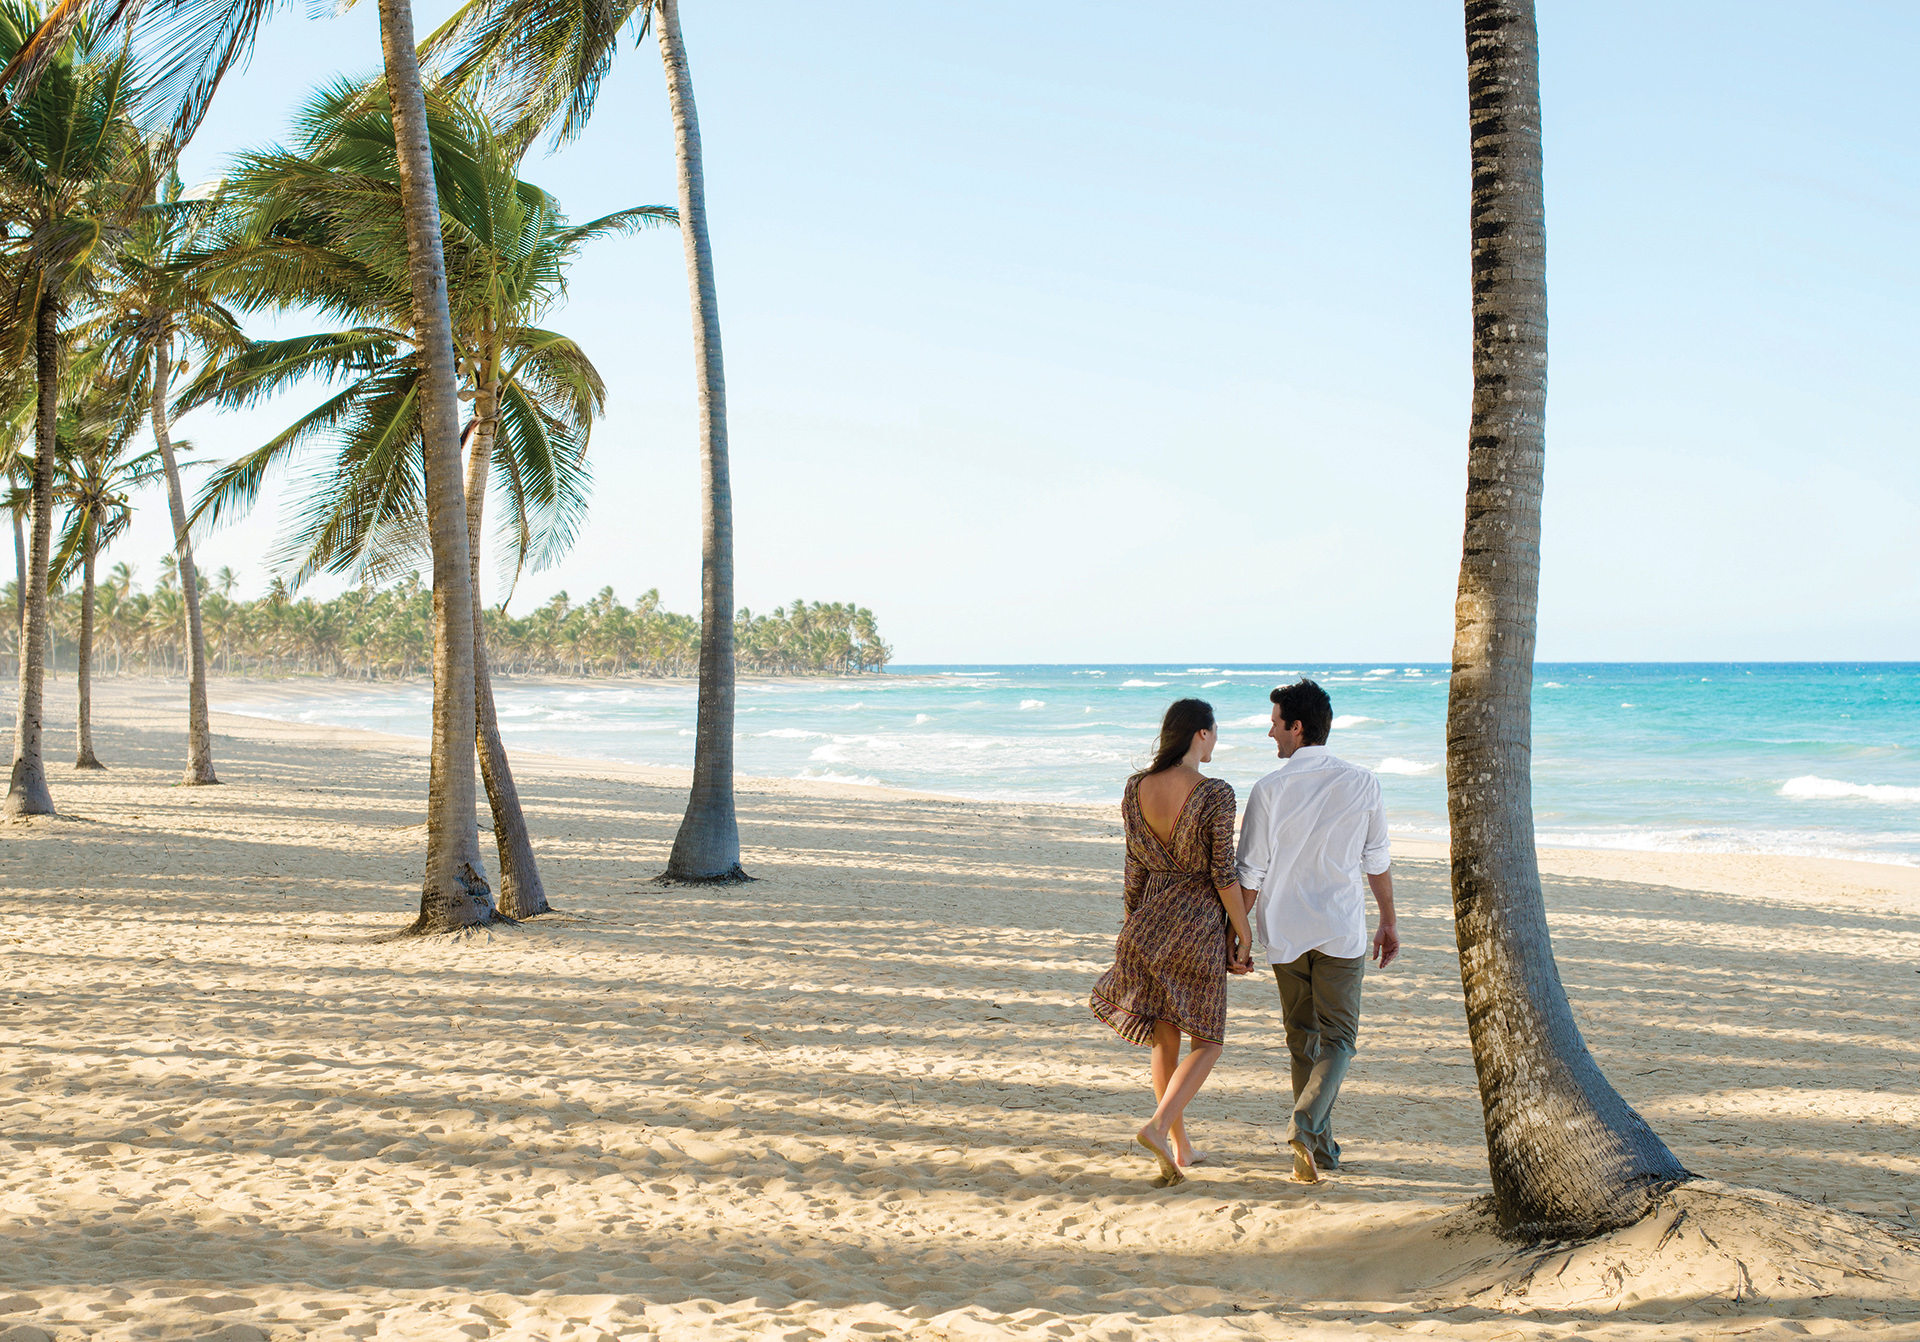 How to Find The Best Beaches in Punta Cana For a Relaxing Adults Escape